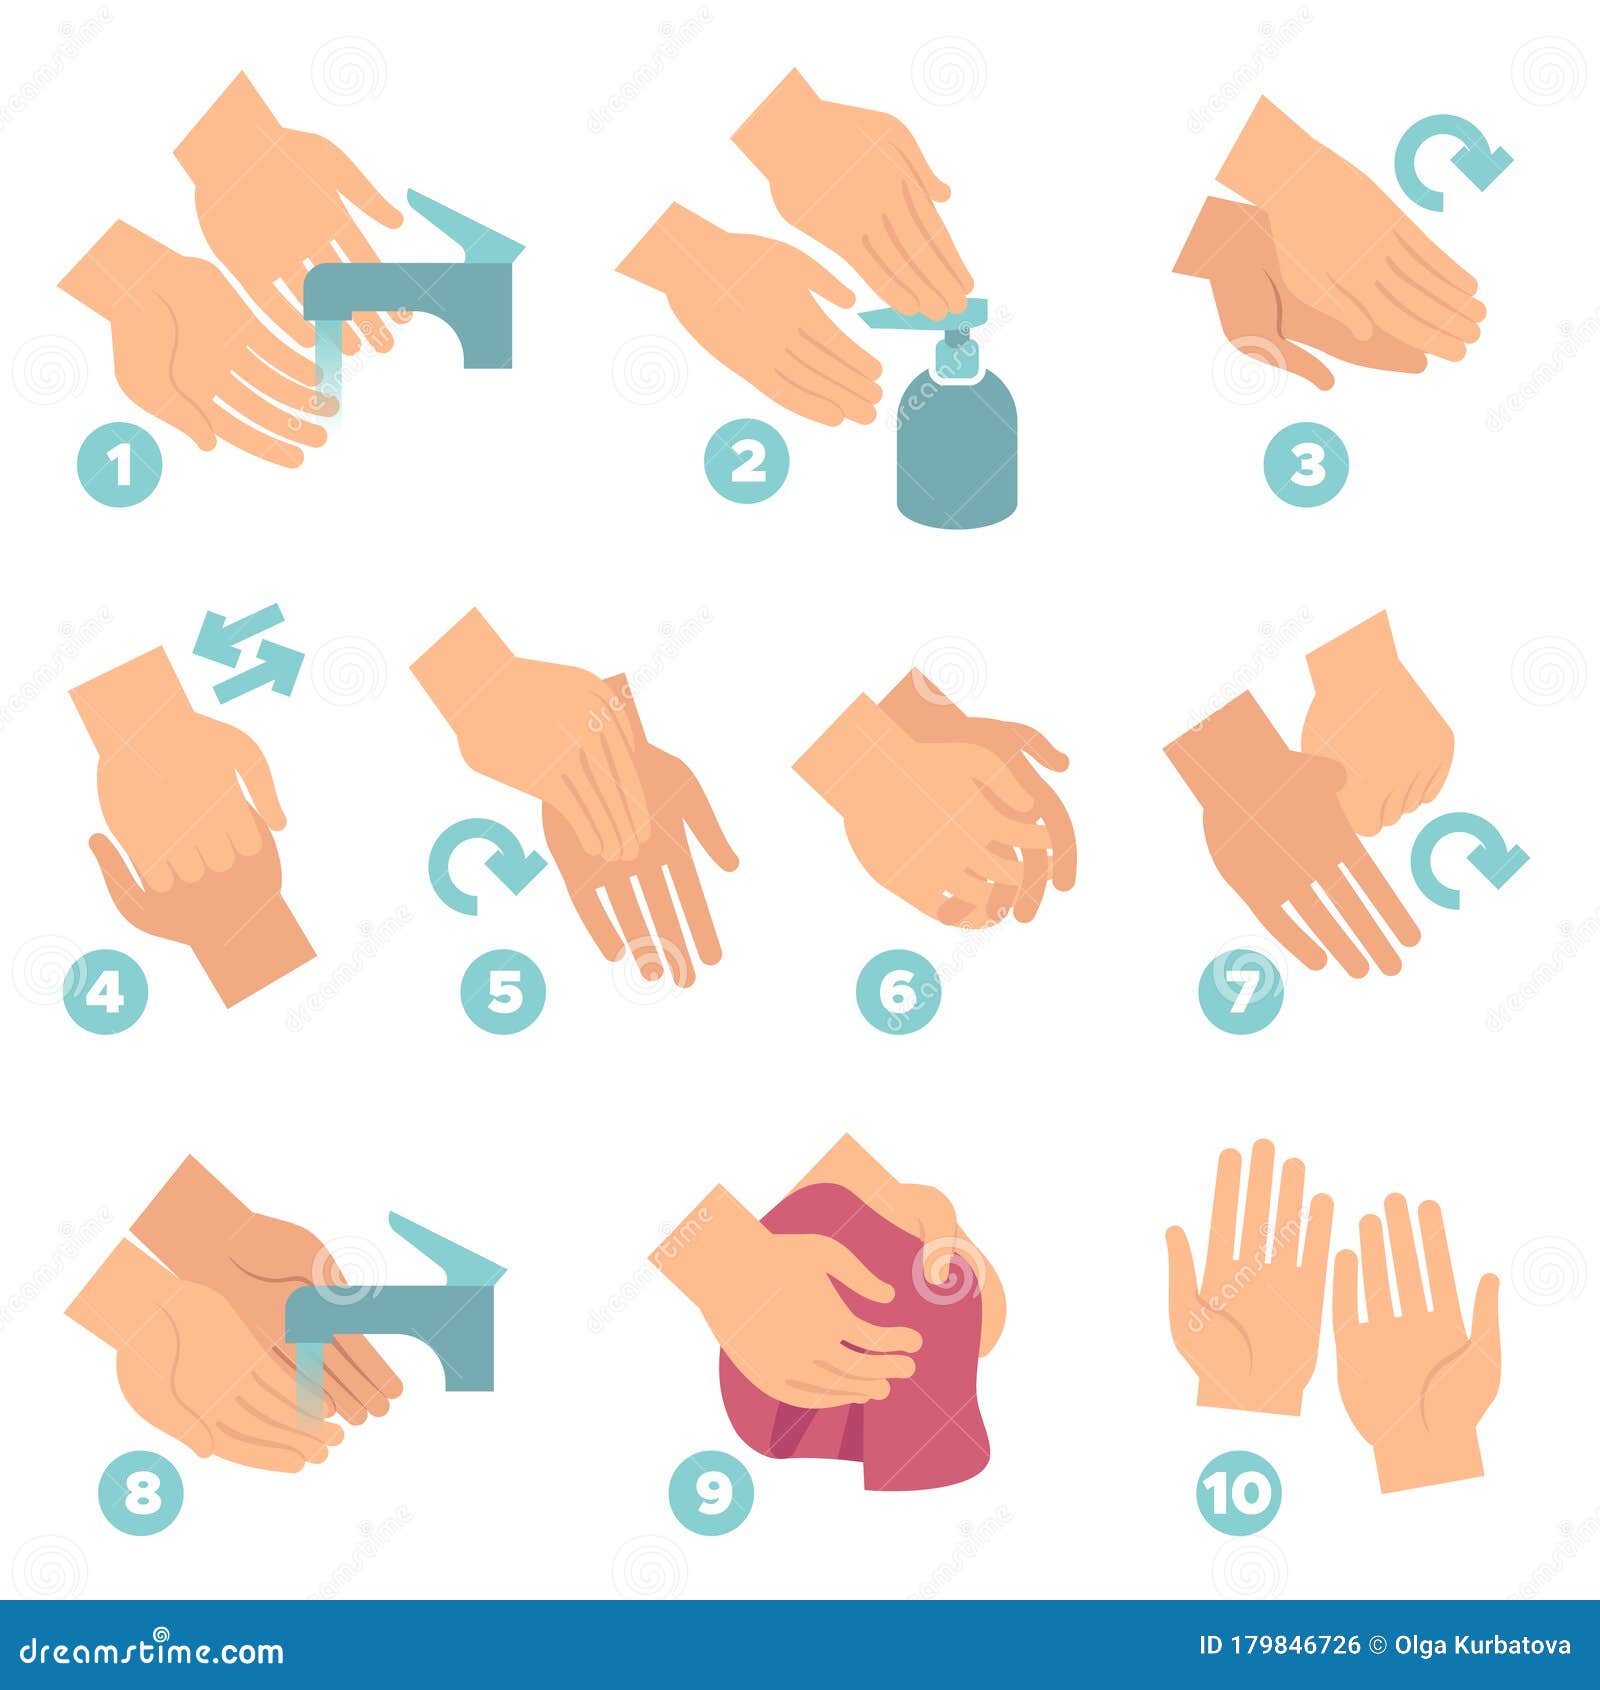 how wash hands. washing hands properly step by step, use sanitizer personal hygiene, disease covid-19 prevention